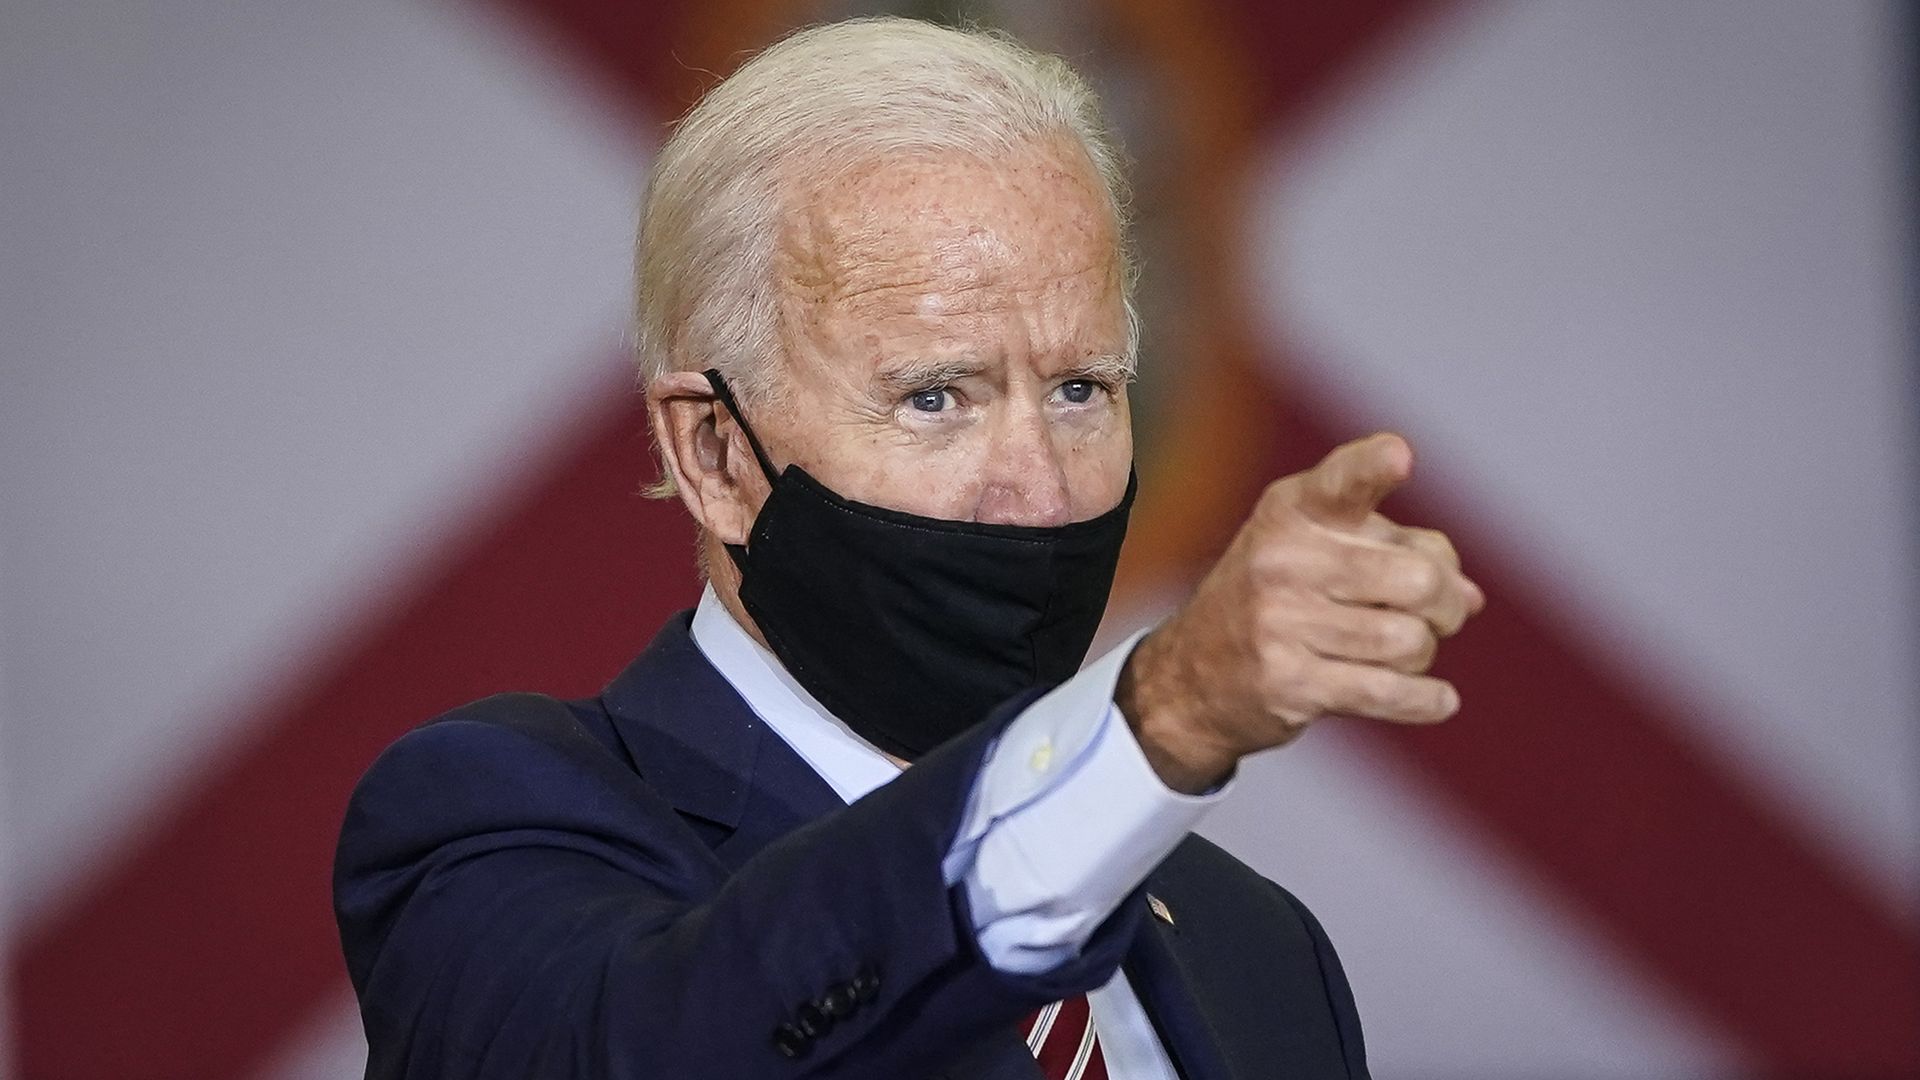 Joe Biden wearing a black face mask and pointing his left index finger